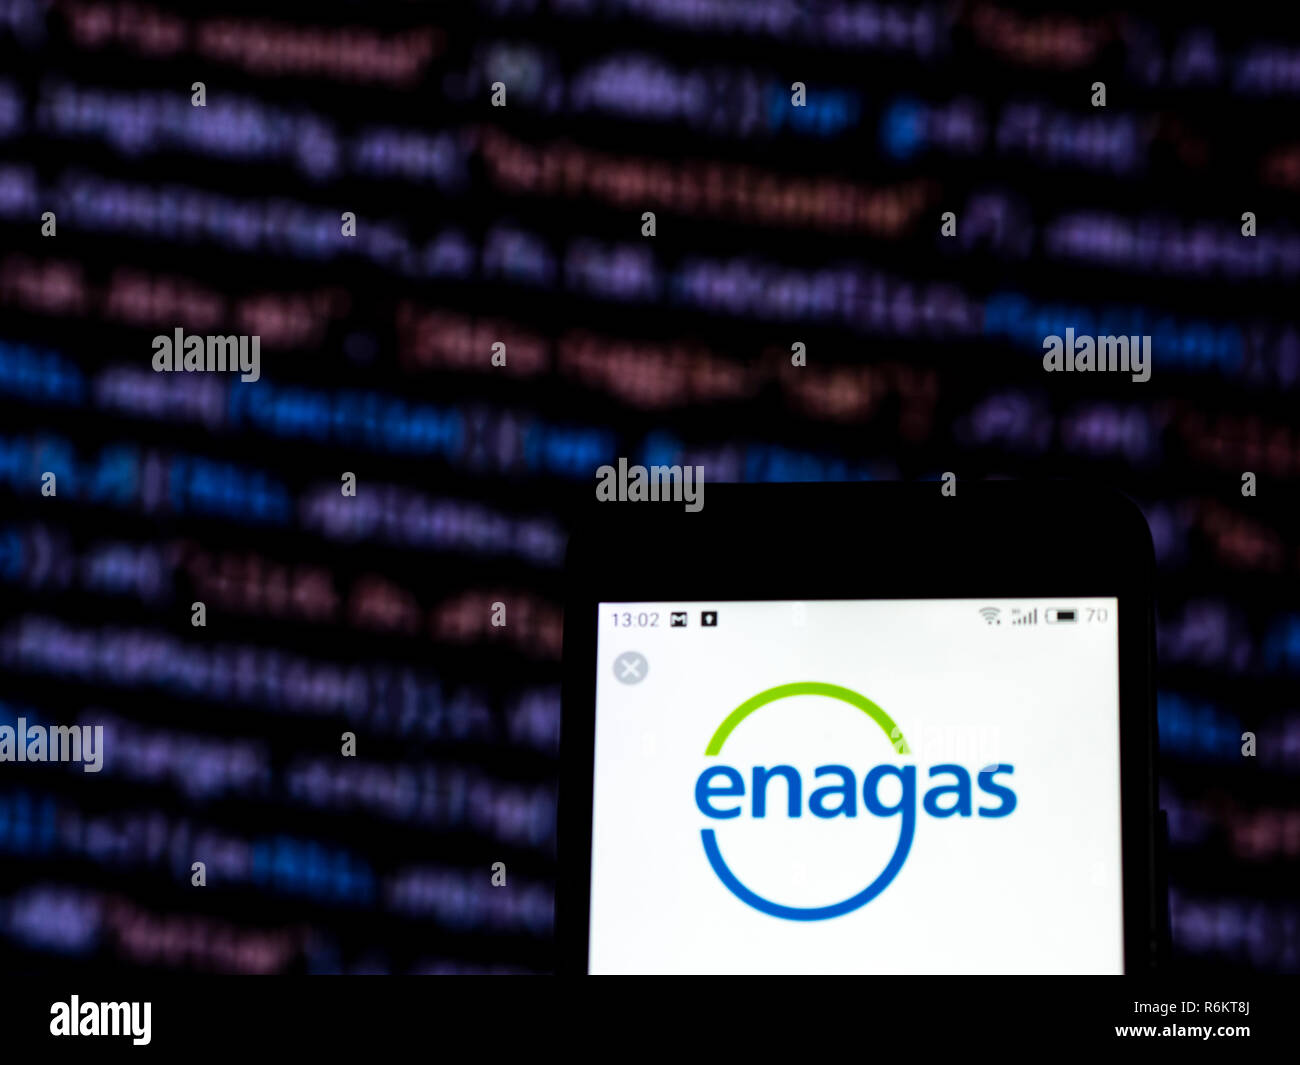 Enagas, S.A. is a Spanish energy company  logo seen displayed on smart phone. Stock Photo